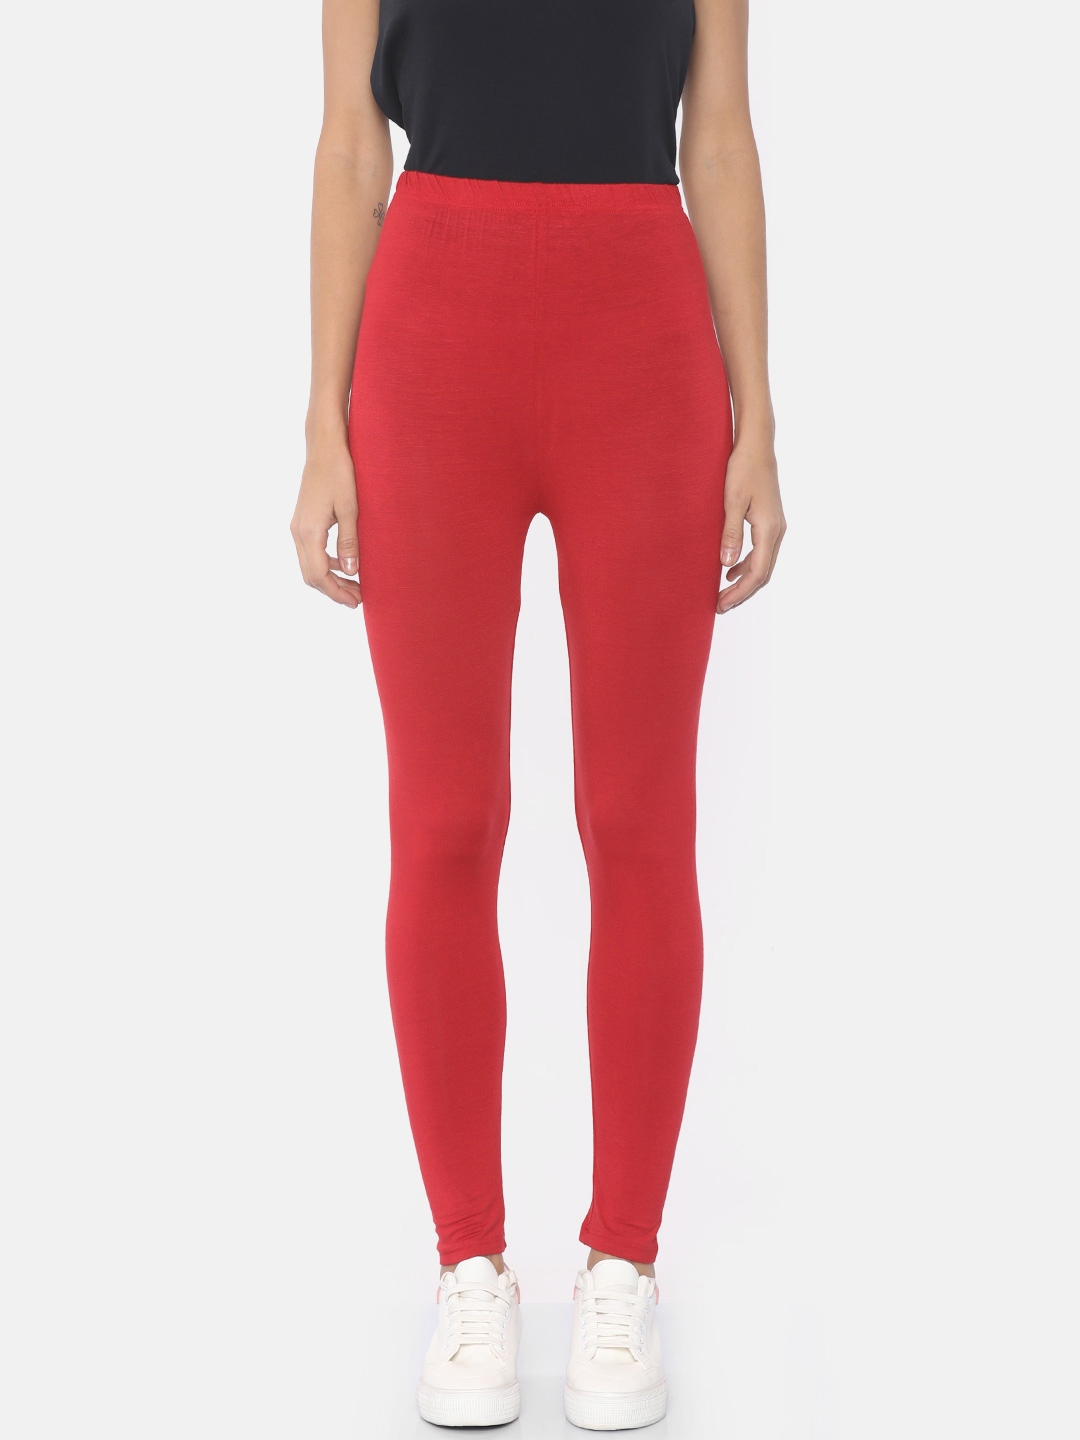 Buy AURELIA Red Solid High Rise Tights - Tights for Women 2400151 | Myntra